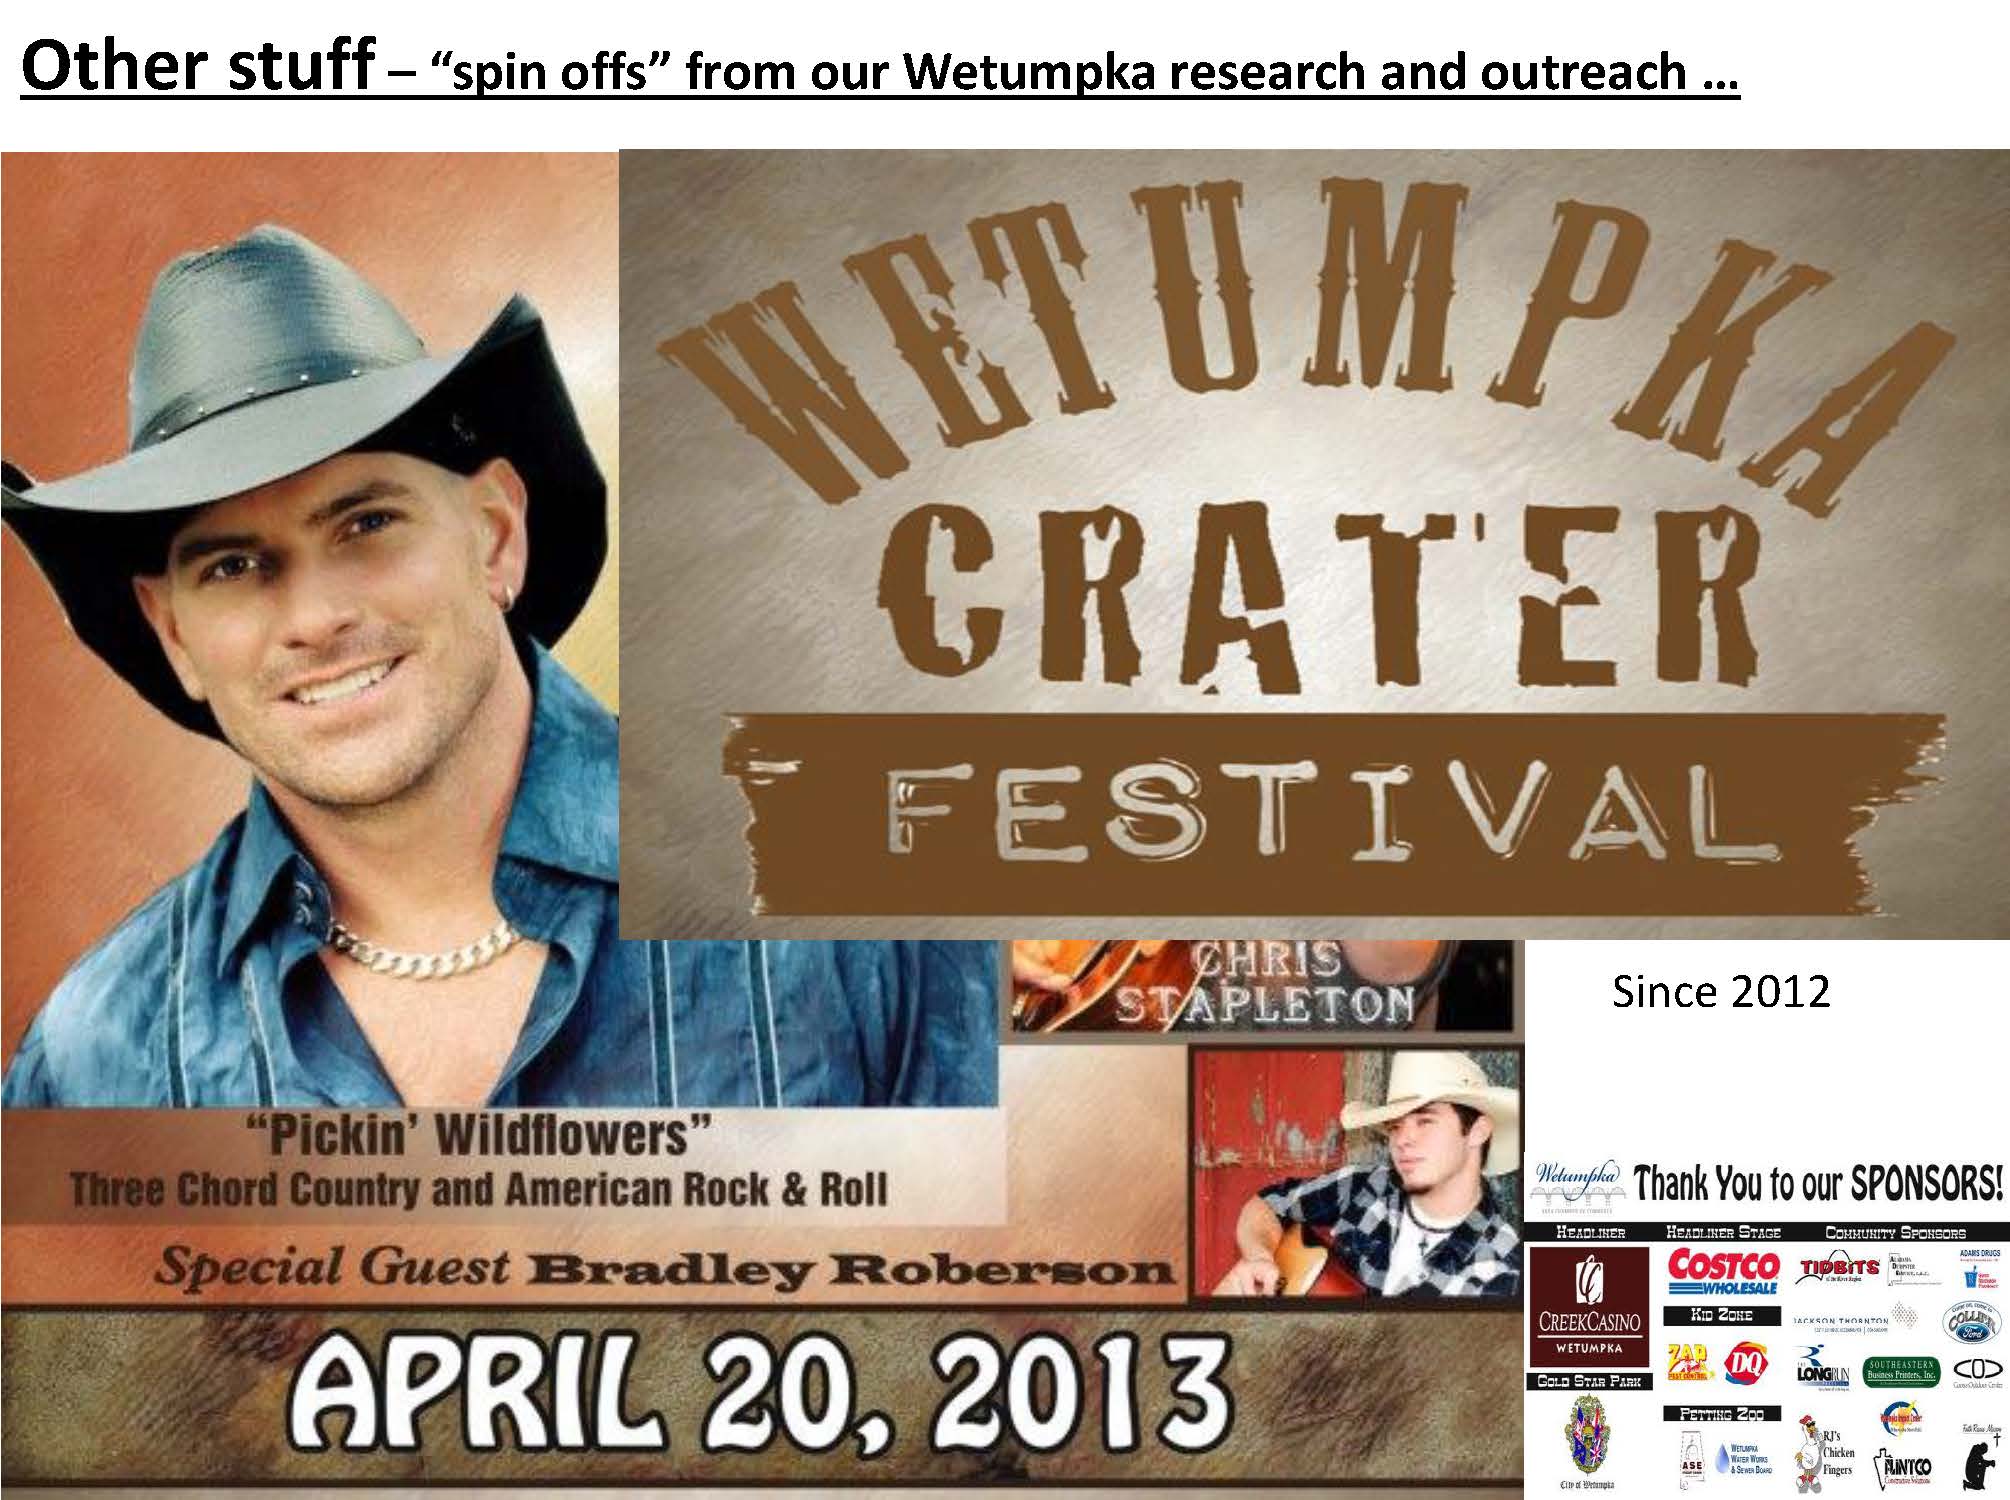 Flyer for the 2013 Wetumpka Crater Festival 